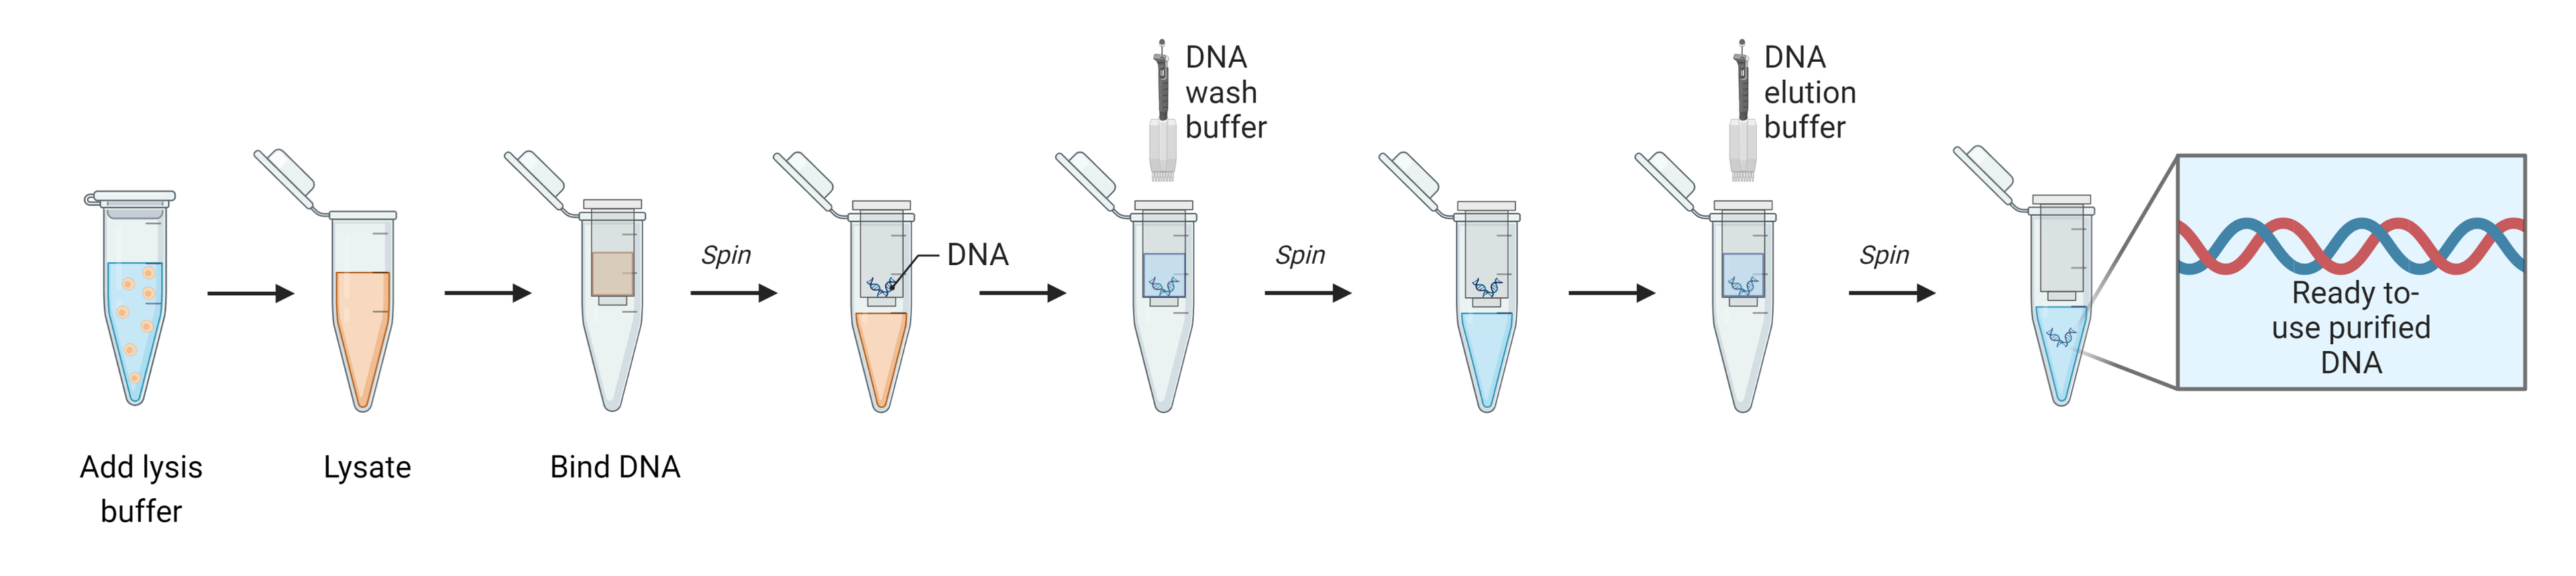 Solid-phase DNA extraction workflow